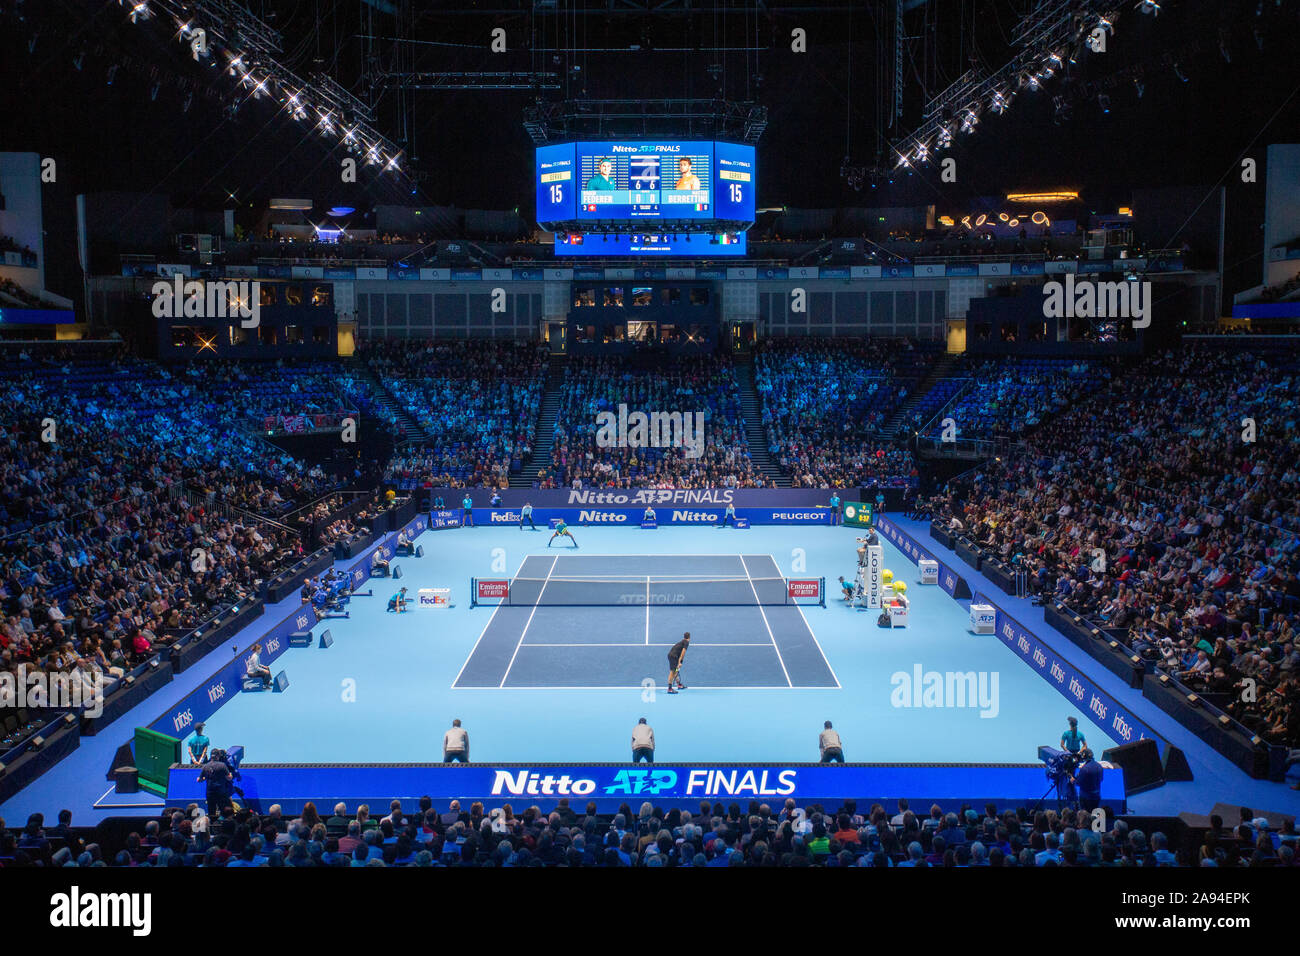 Four Box Tickets To Nitto ATP Tennis Finals Tournament #6, 45% OFF